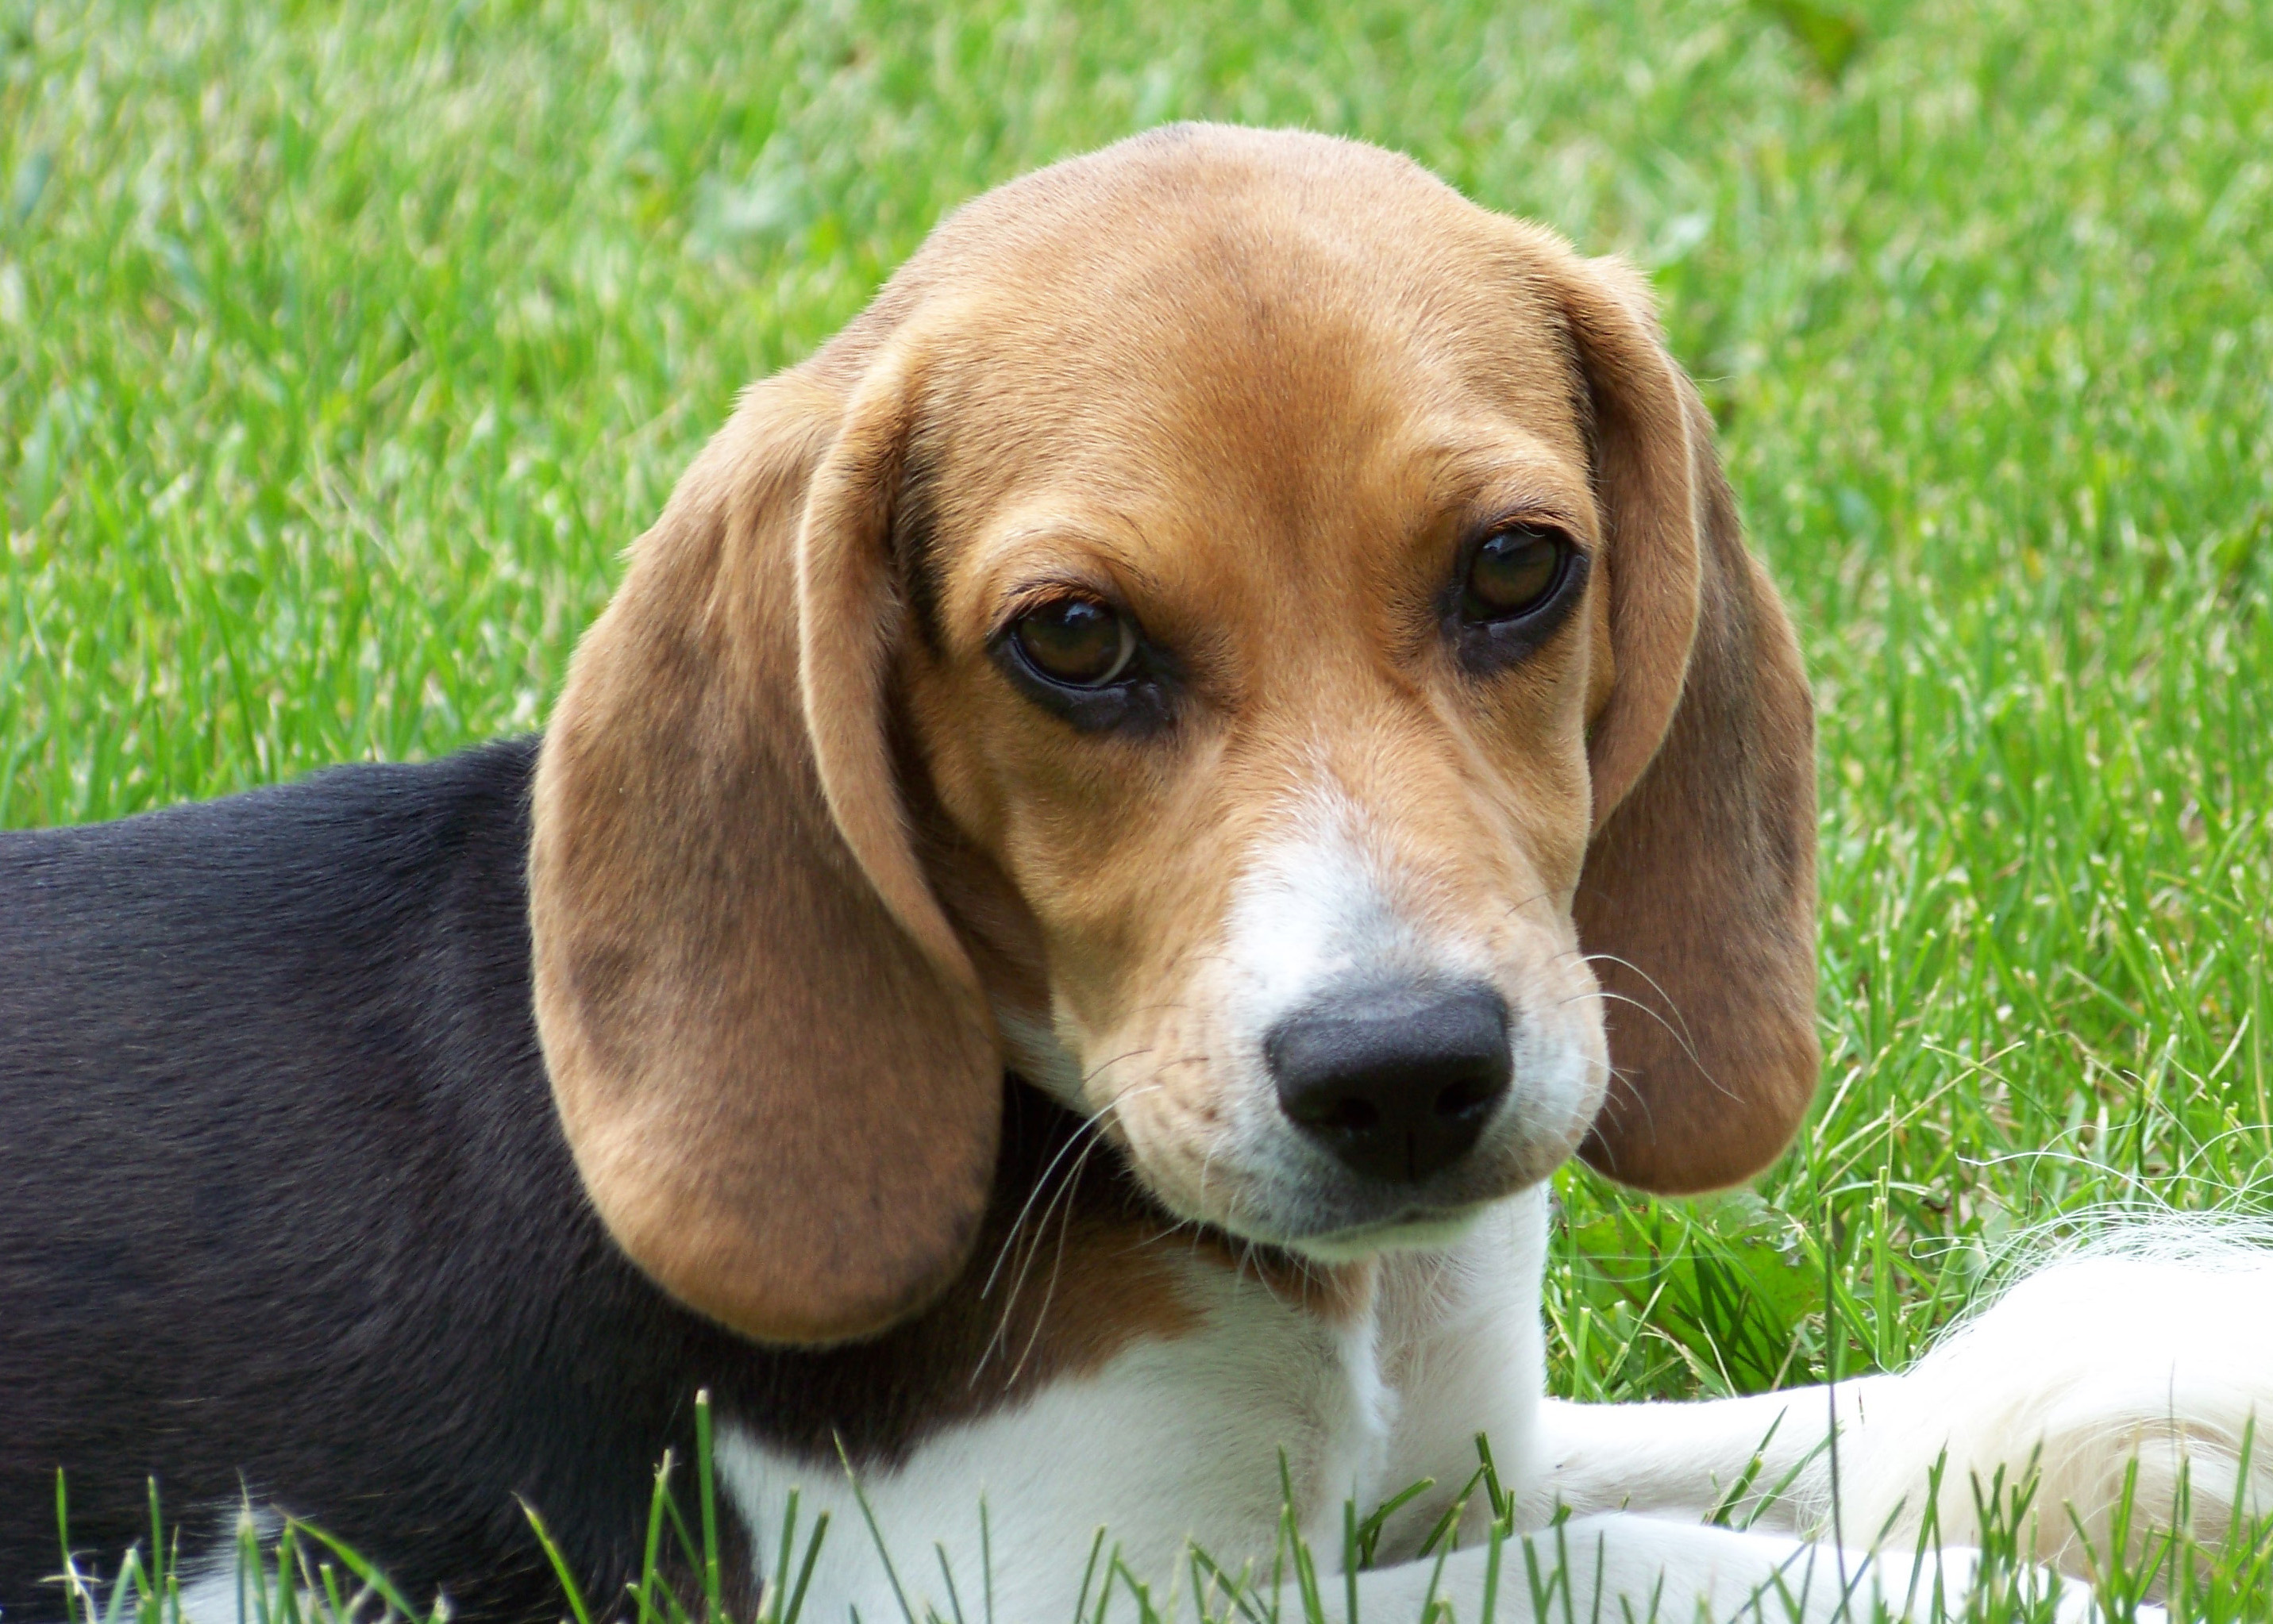 File:Cute beagle puppy lilly.jpg - Wikimedia Commons